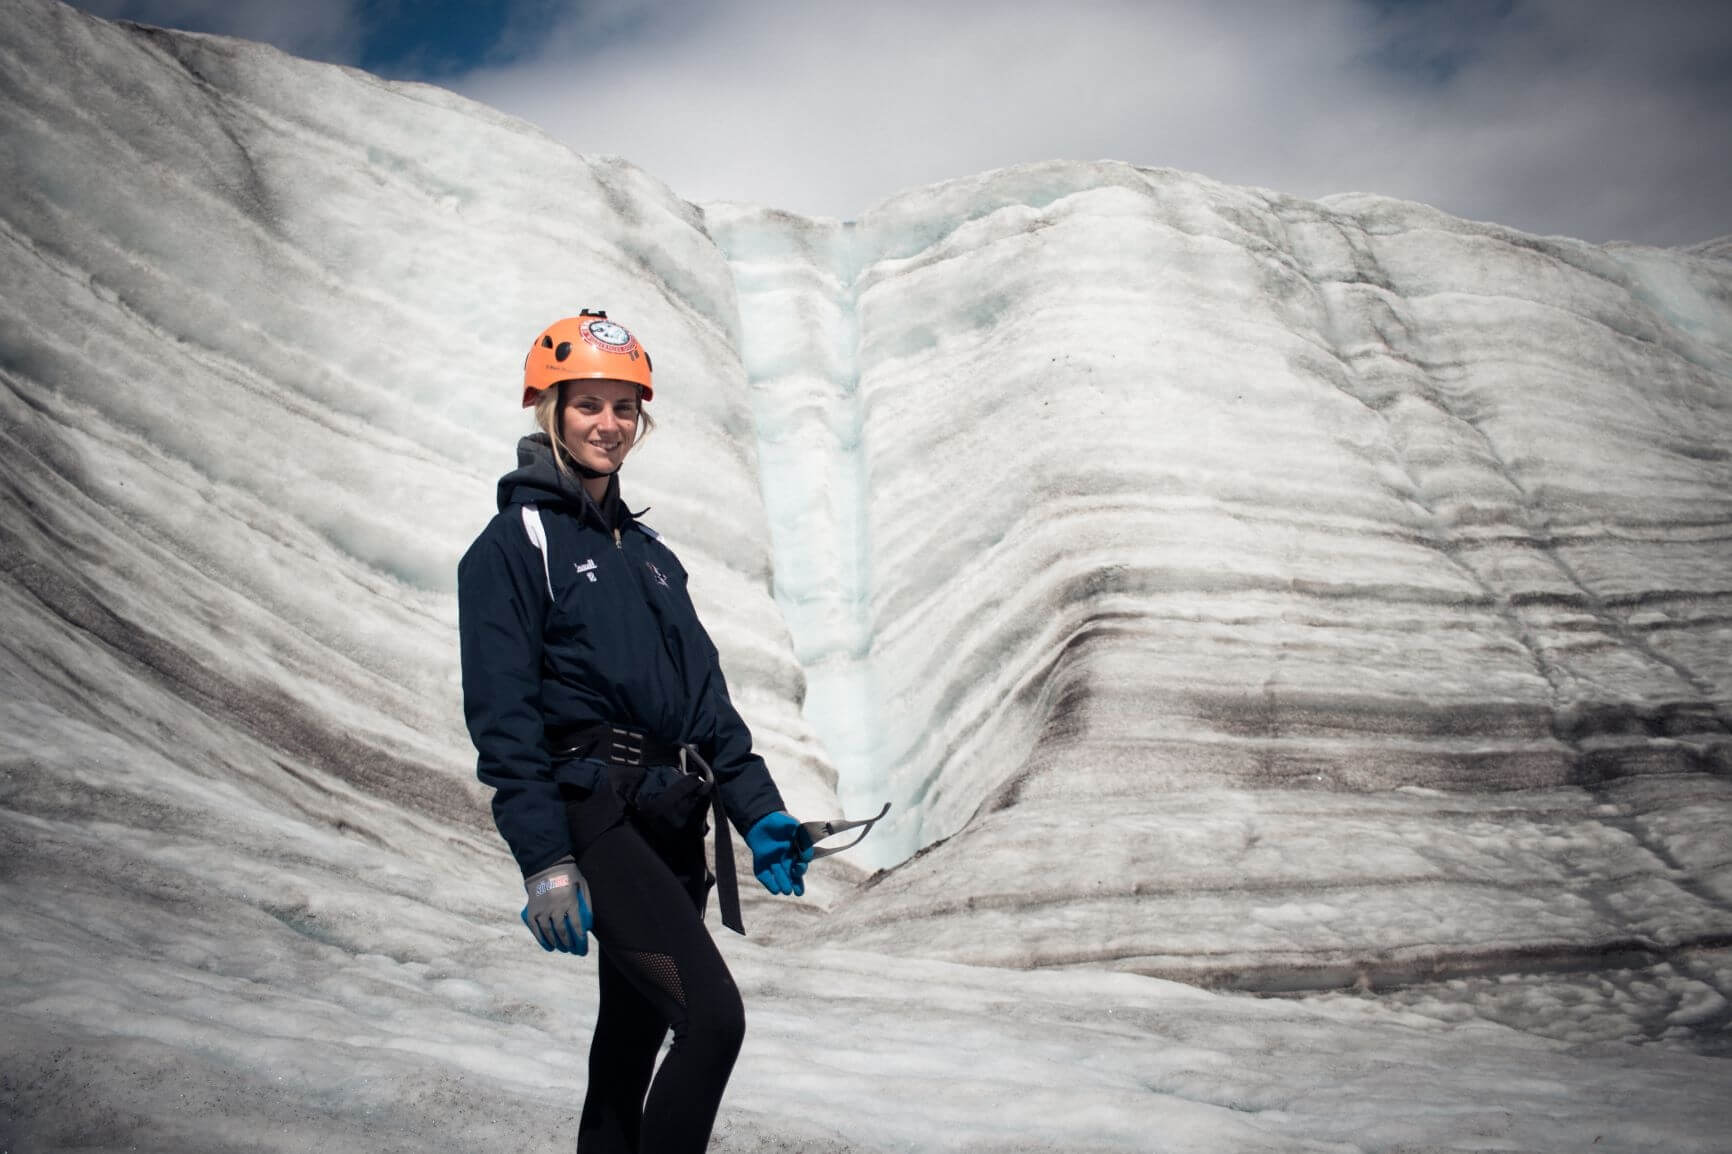 Lady standing in front of a glacier in Alaska.